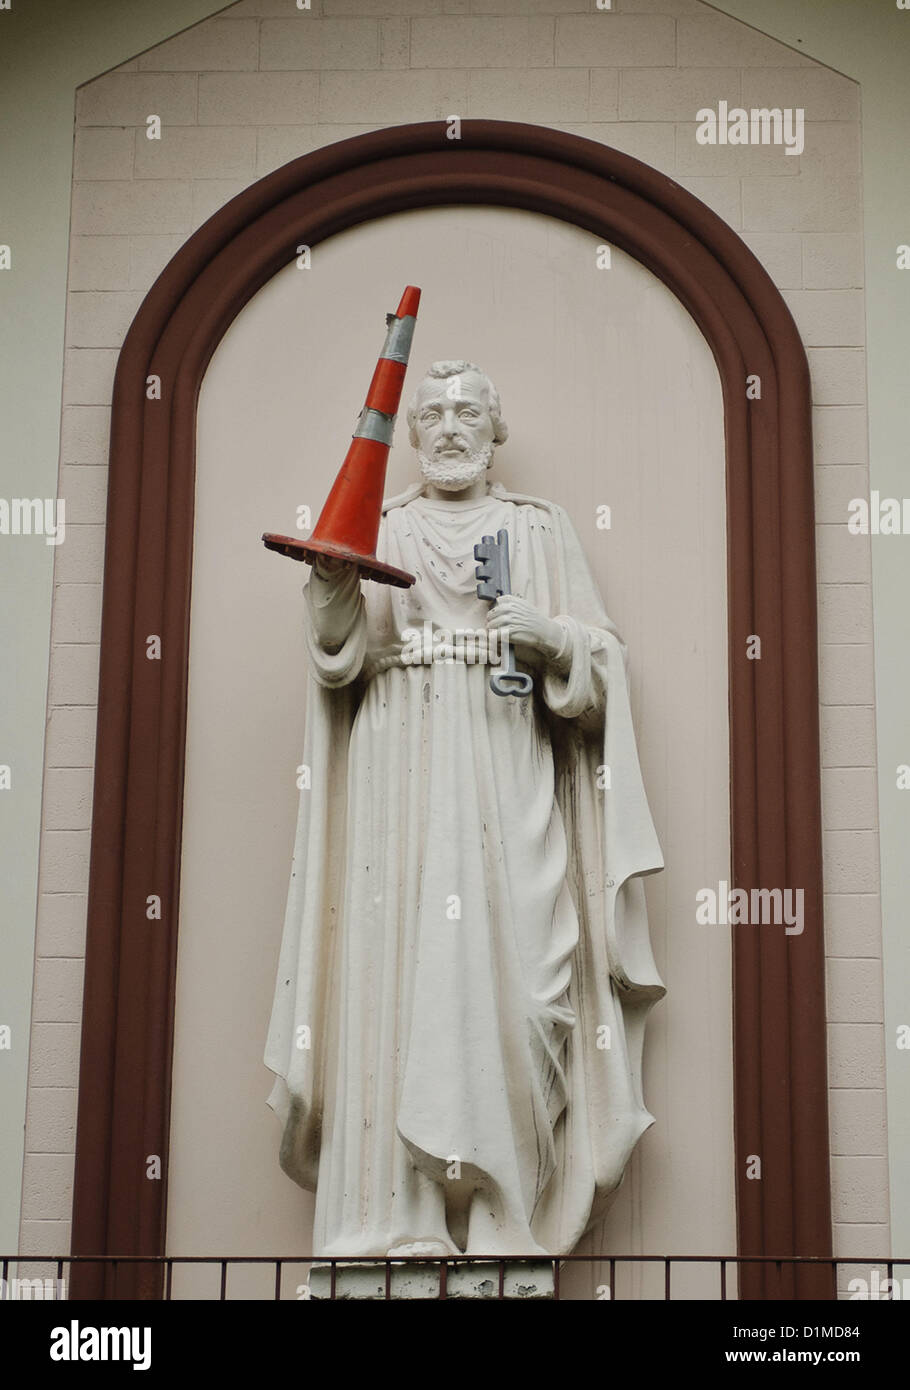 Dec. 27, 2012 - Christchurch, New Zealand - A statue of St. Peter at St. Peter's Catholic Church in the Christchurch, New Zealand, suburb of Beckenham has an orange safety cone covering  one hand, testament to damage caused by 2010 and 2011 earthquakes. (Credit Image: © PJ Heller/ZUMAPRESS.com) Stock Photo